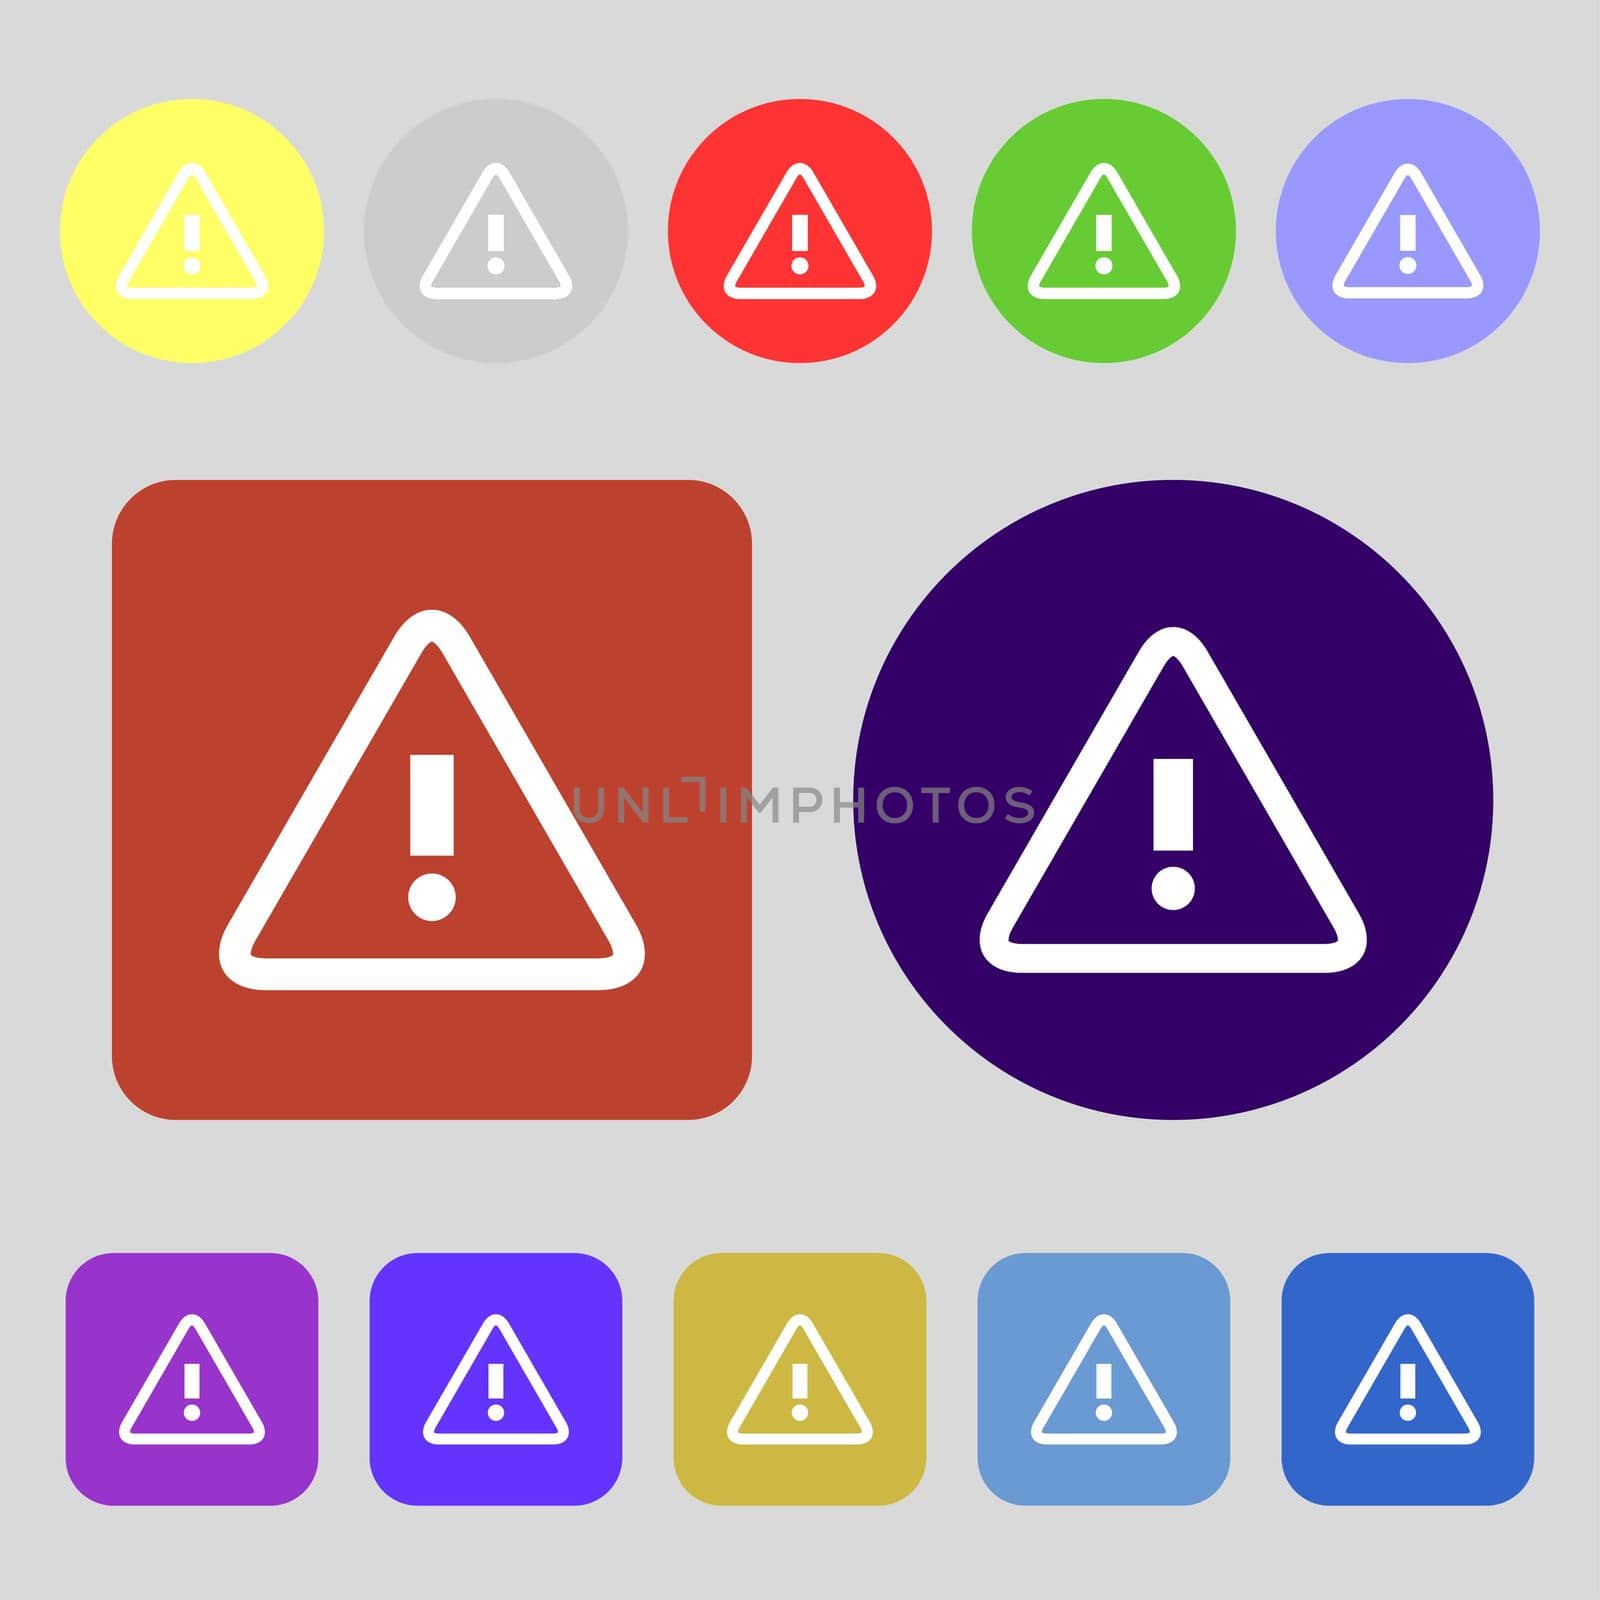 Attention caution sign icon. Exclamation mark. Hazard warning symbol.12 colored buttons. Flat design. illustration